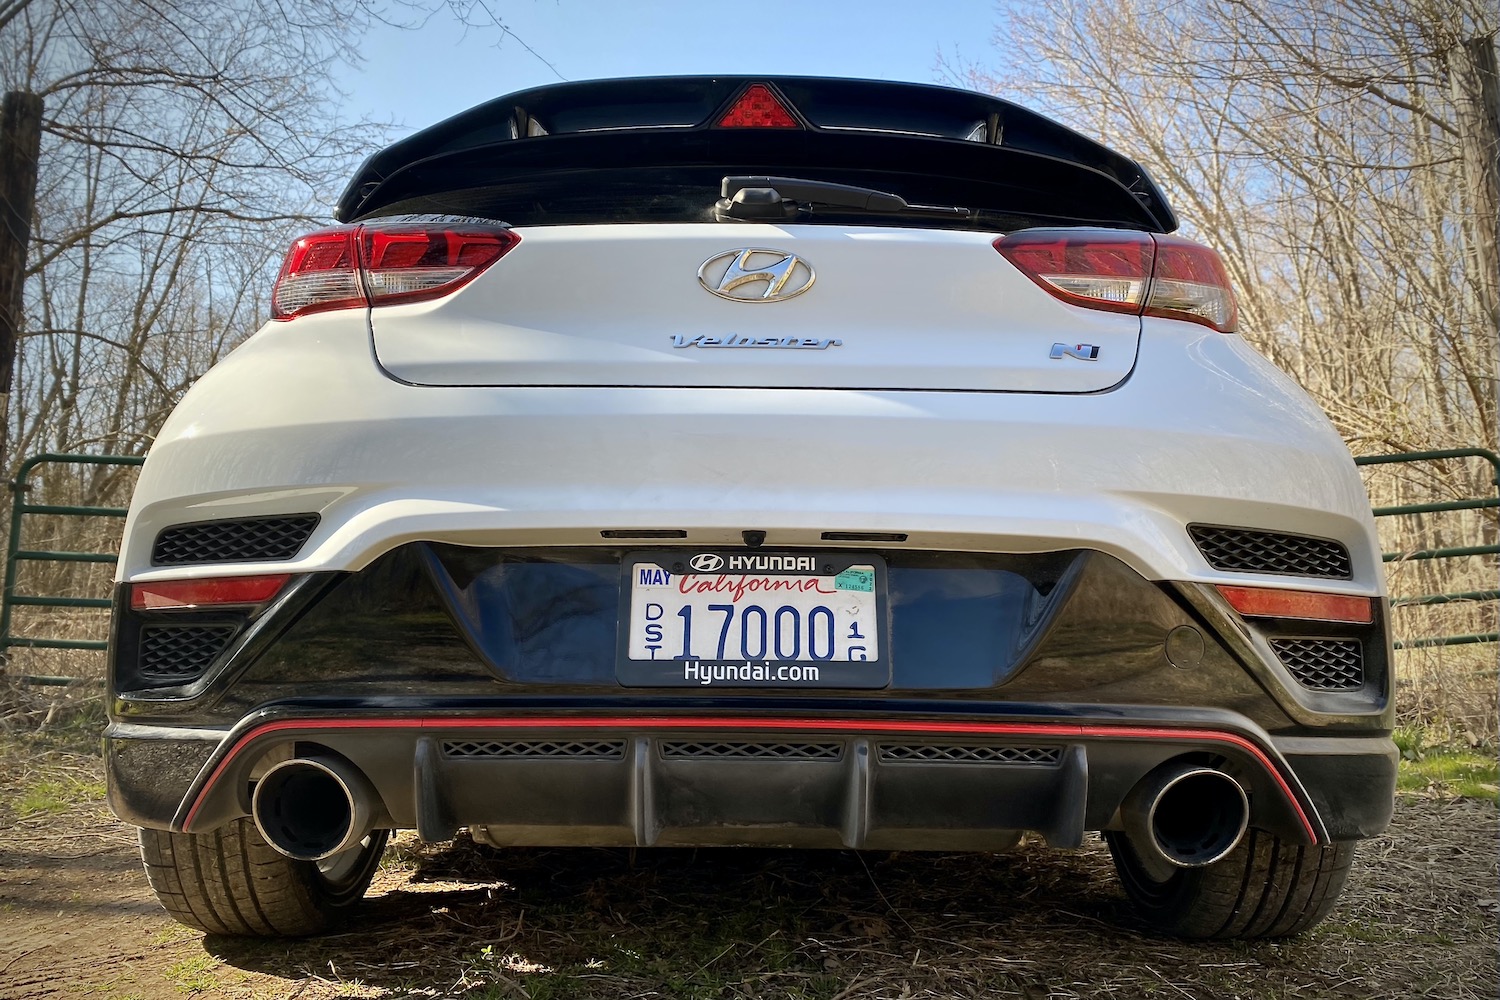 Hyundai Veloster N rear end close up from the bottom.